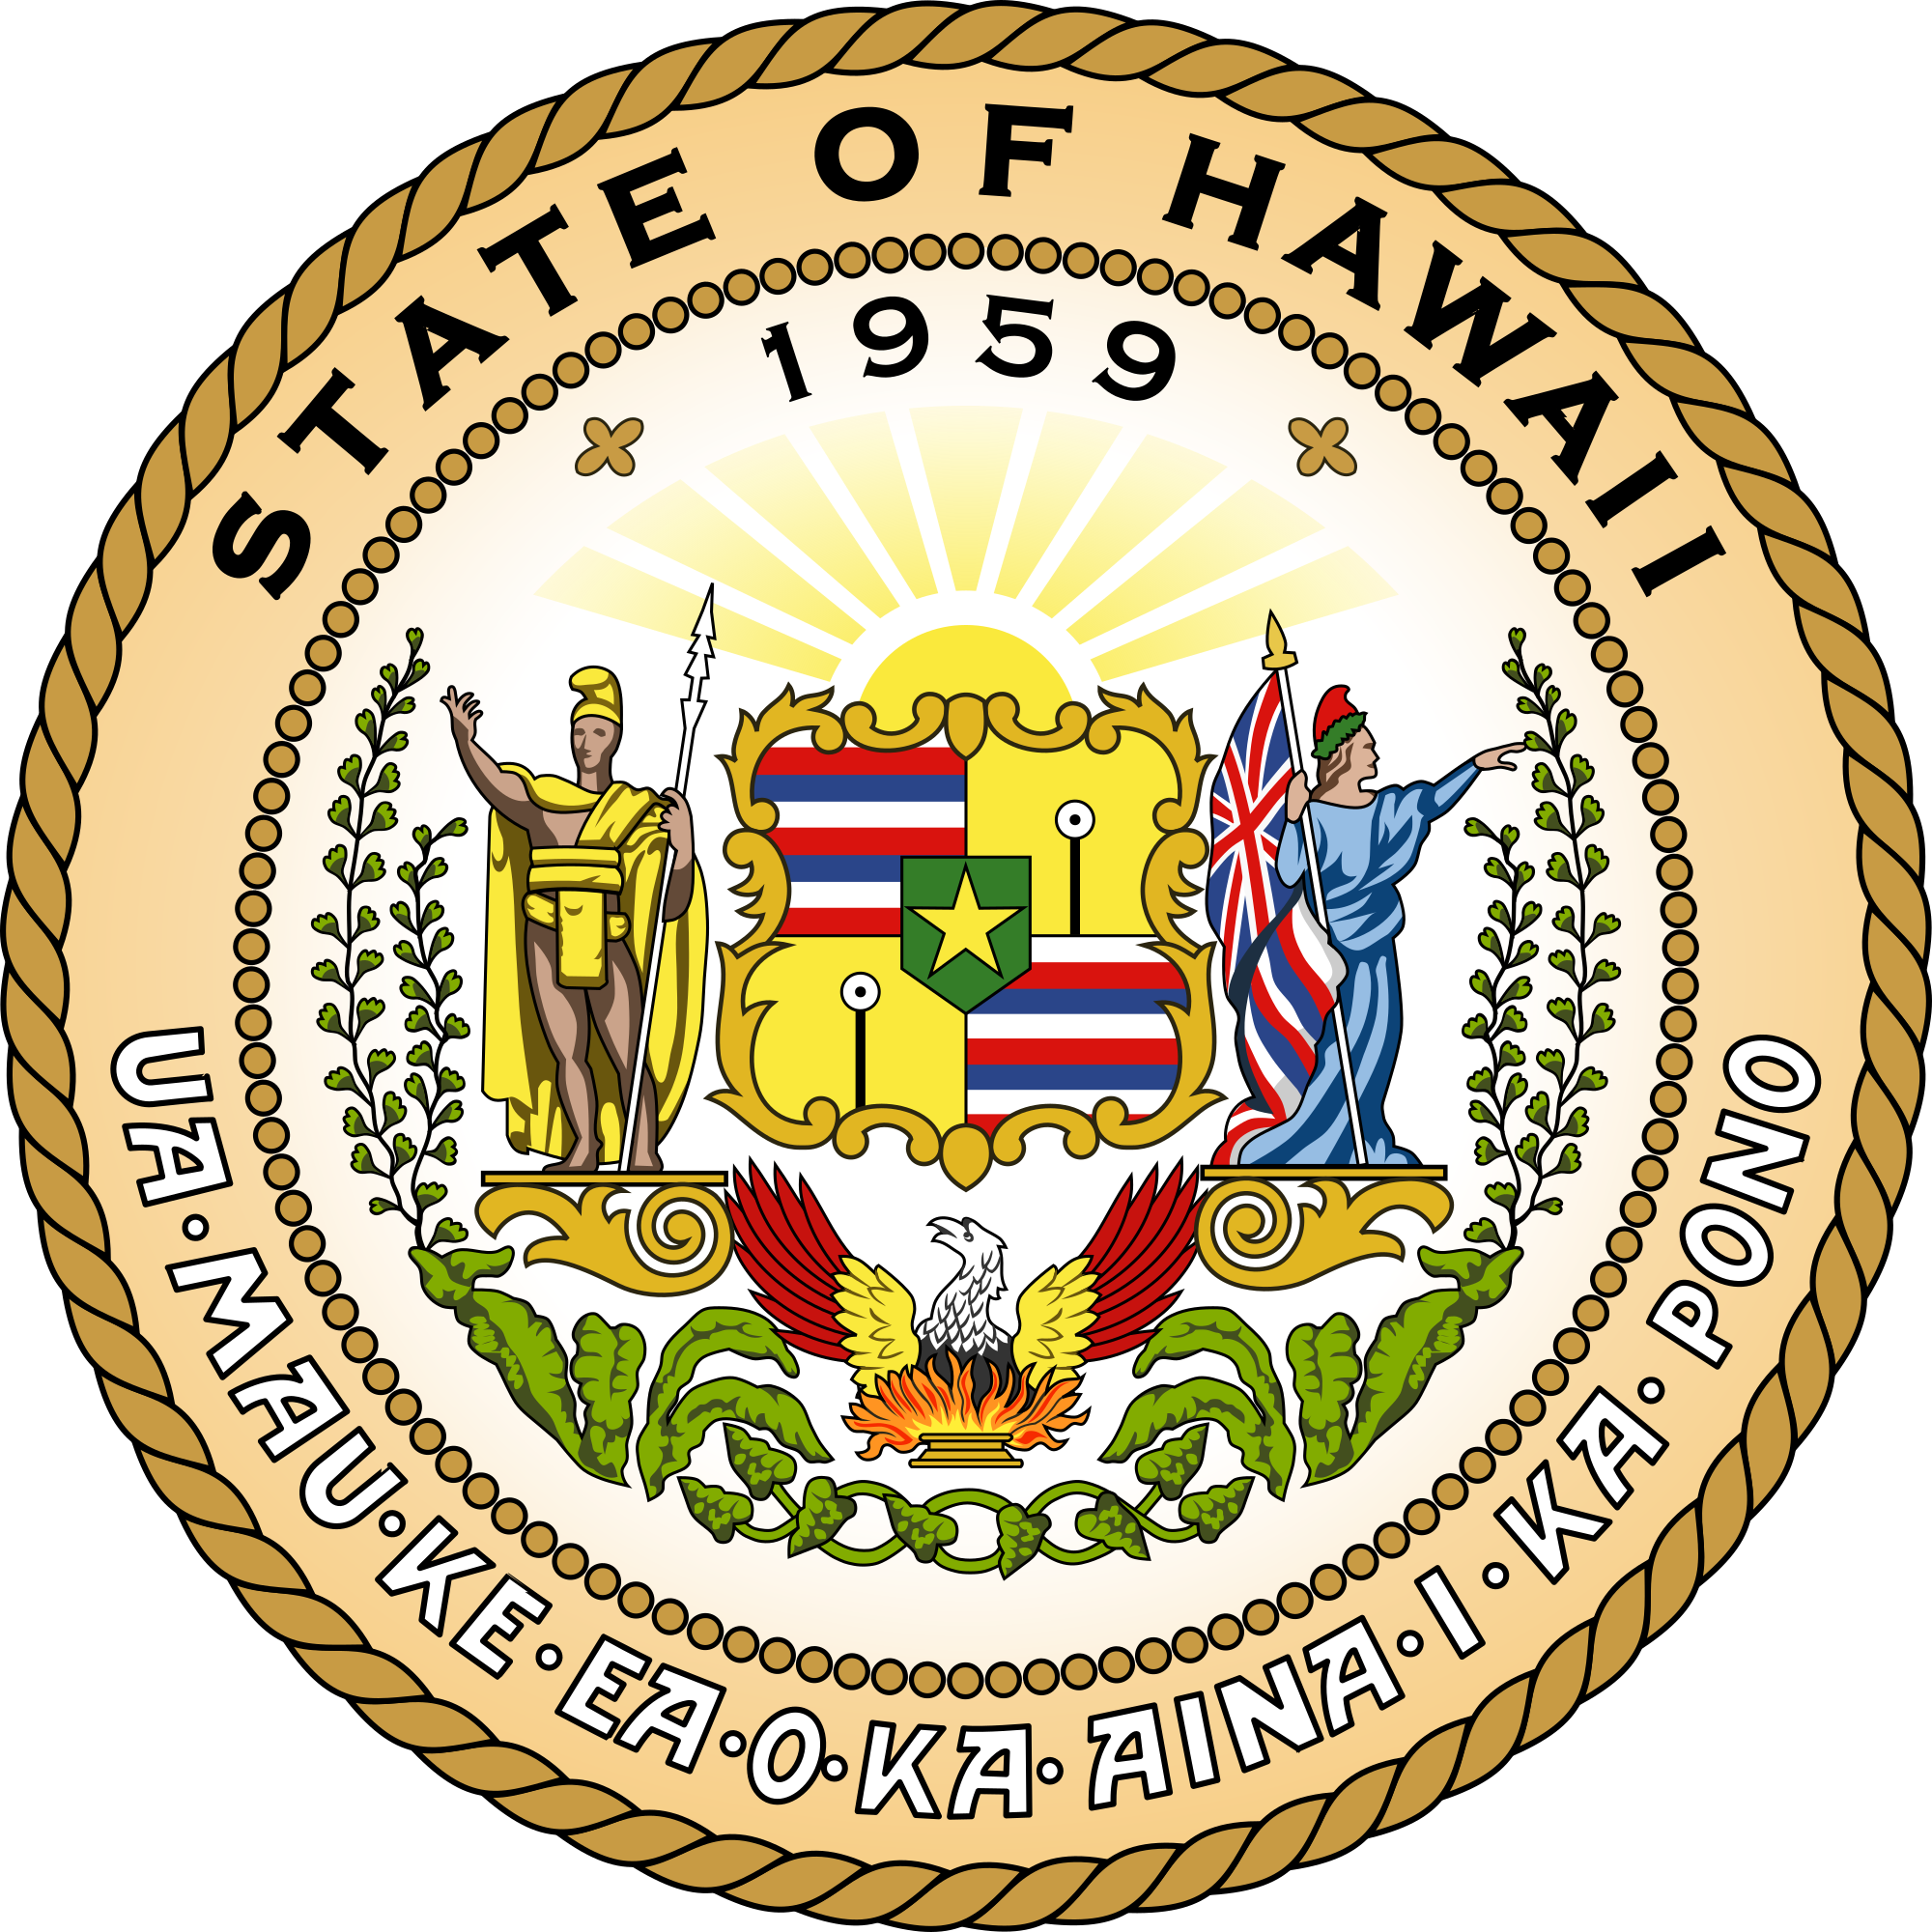 Open - Hawaii As A State (2200x2200)